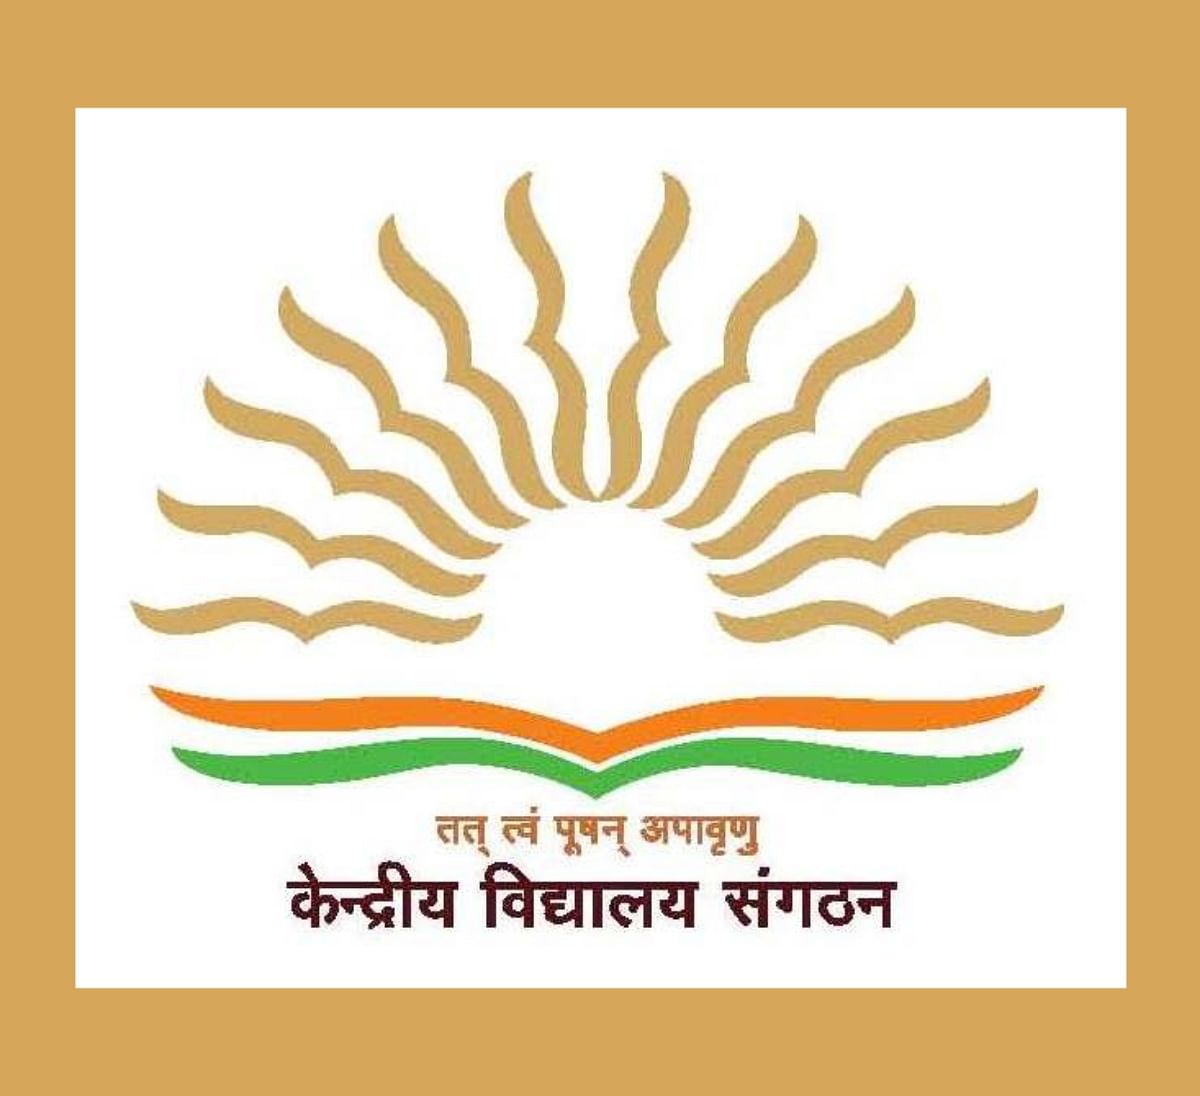 KVS Deputy Commissioner Recruitment 2021: Vacancy for 8 Posts, BEd Pass can Apply